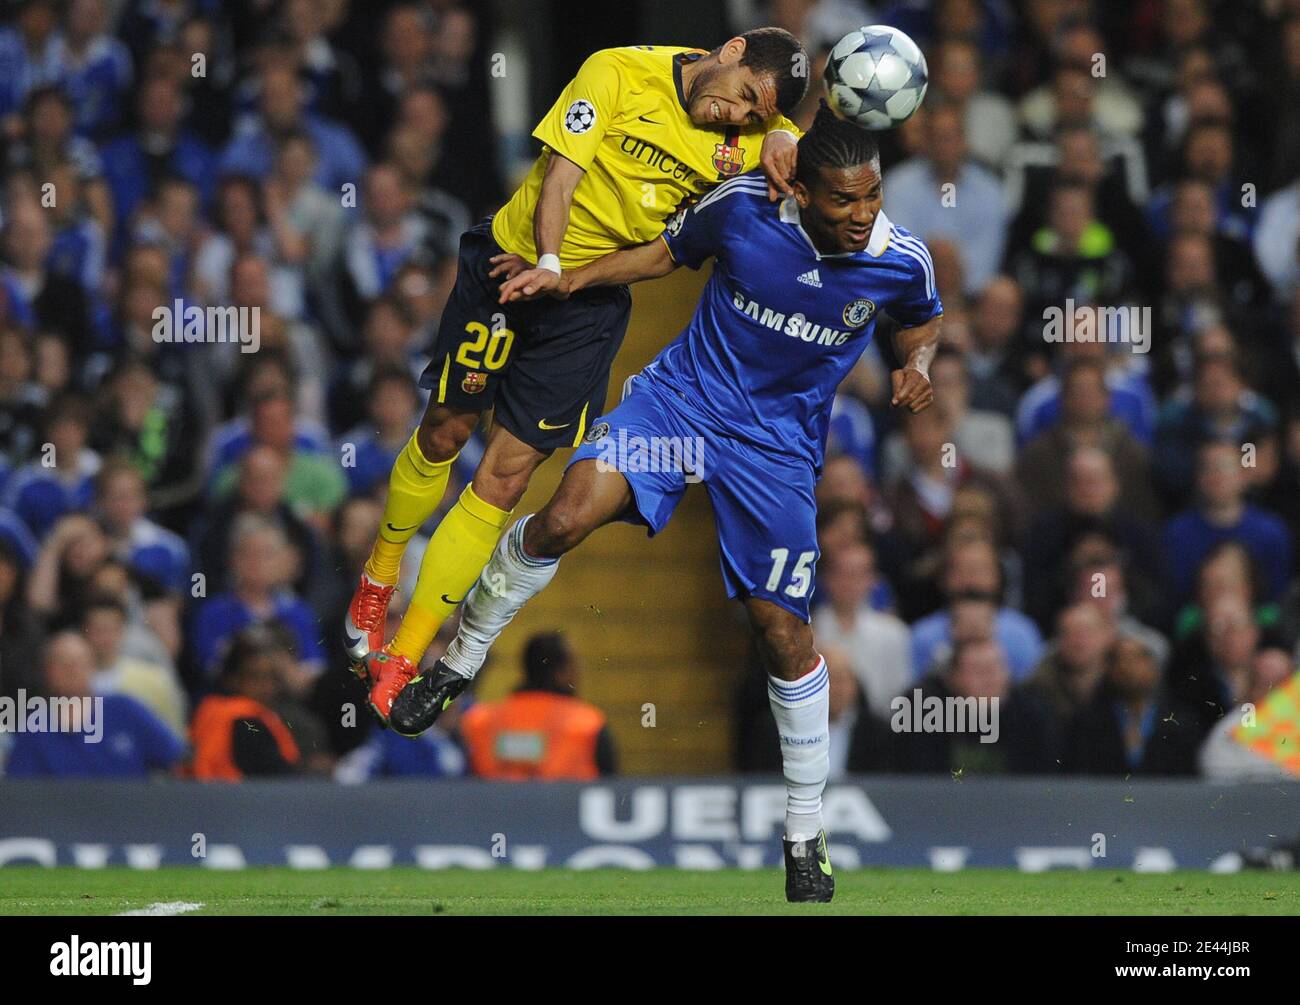 Barcelona S Daniel Alves Challenges With His Head Chelsea S Florent Malouda In Air During The Uefa Champions League Soccer Match Semi Final Second Leg Chelsea Vs Barcelona At The Stamford Bridge Stadium In